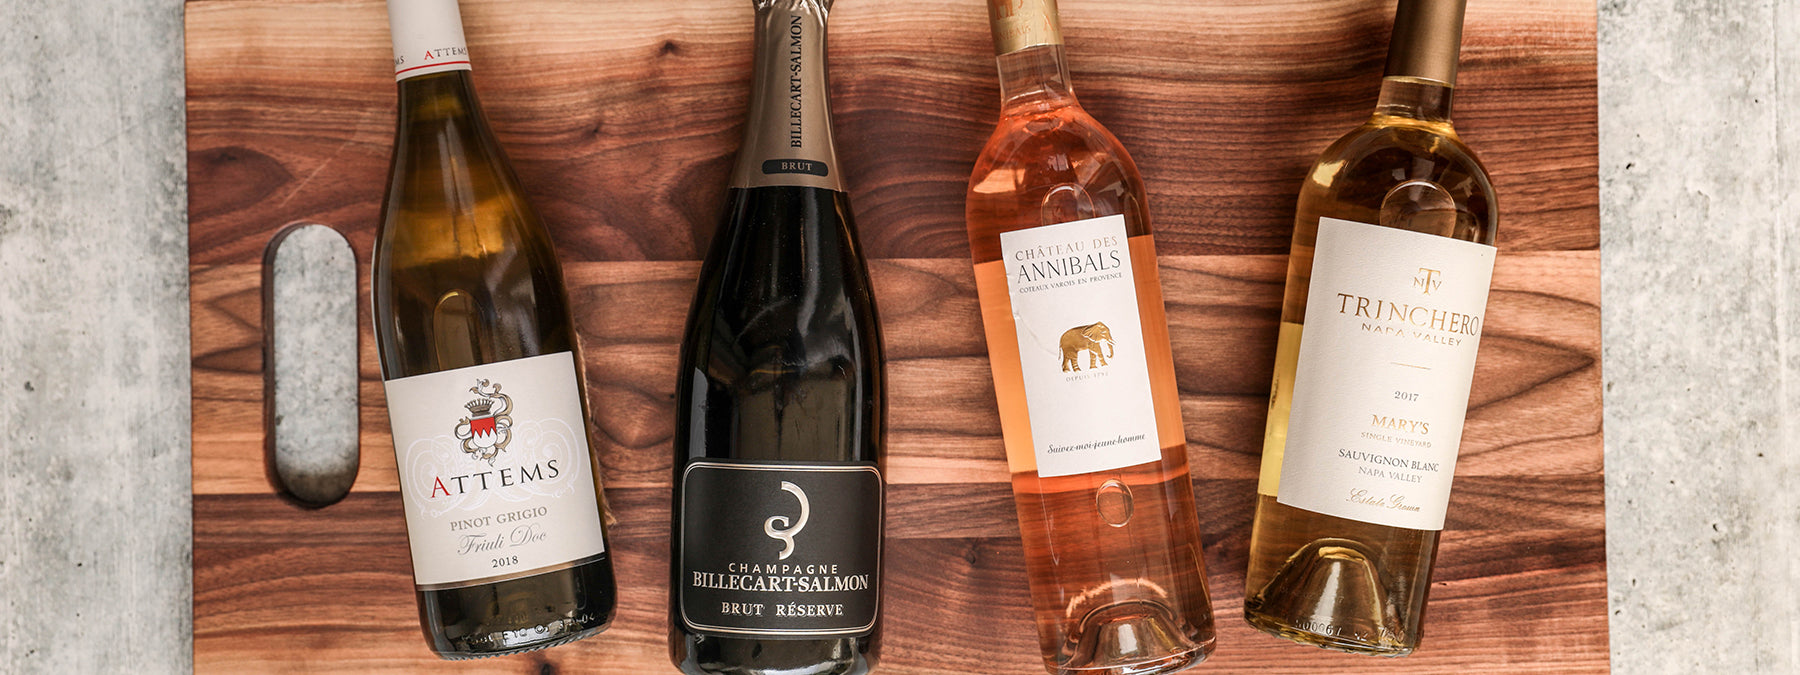 OUR FAVORITE WINES THIS SUMMER